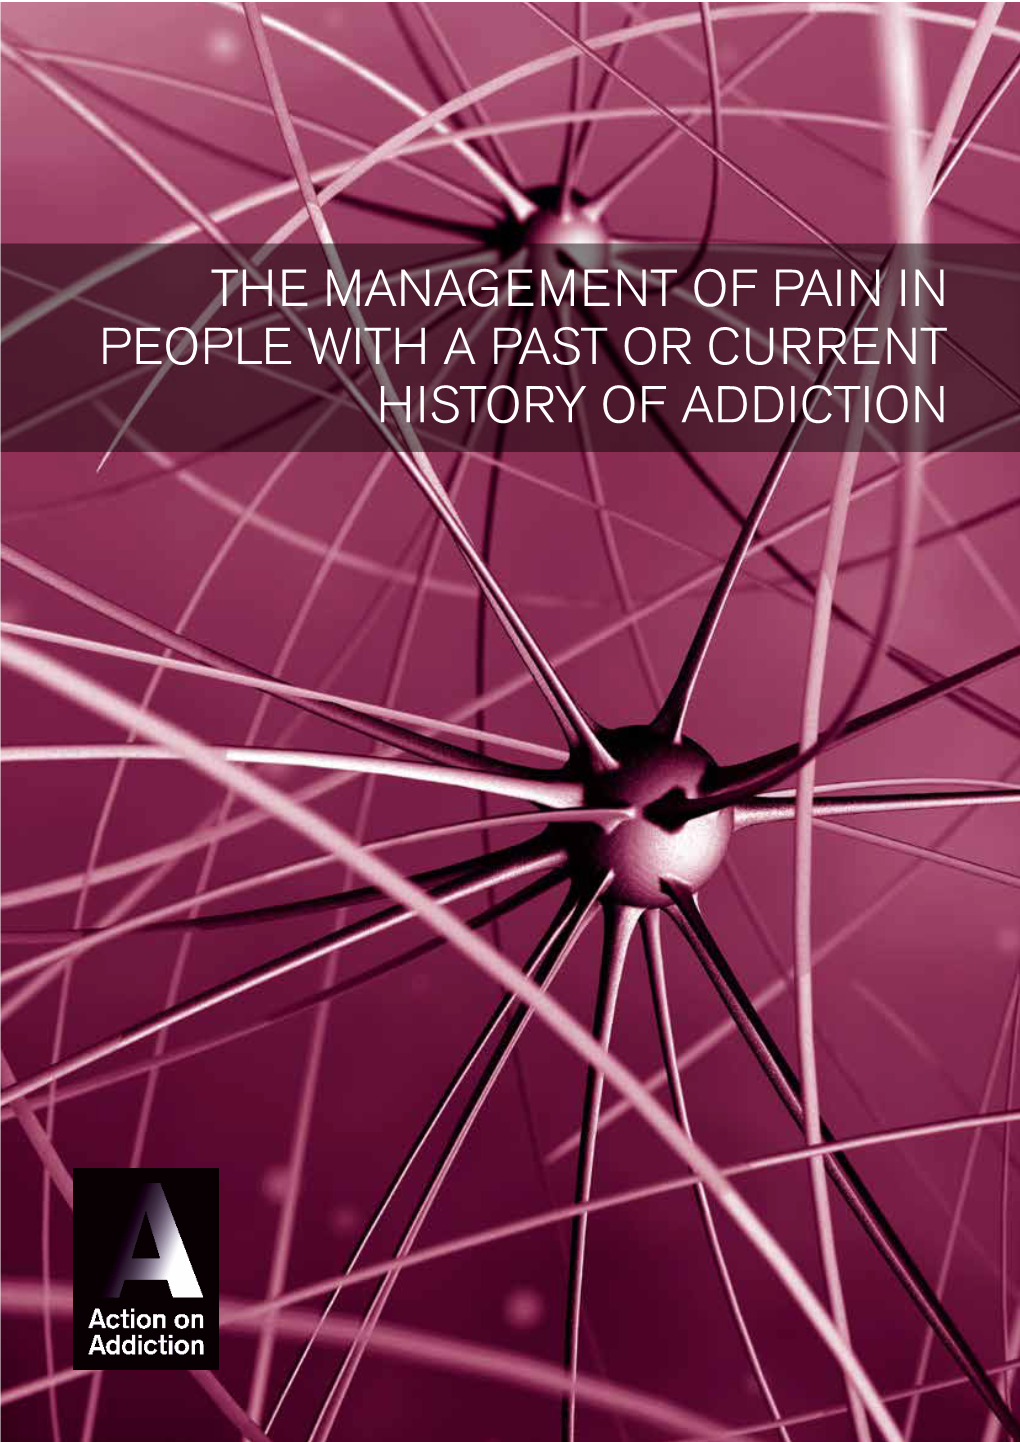 The Management of Pain in People with a Past Or Current History of Addiction